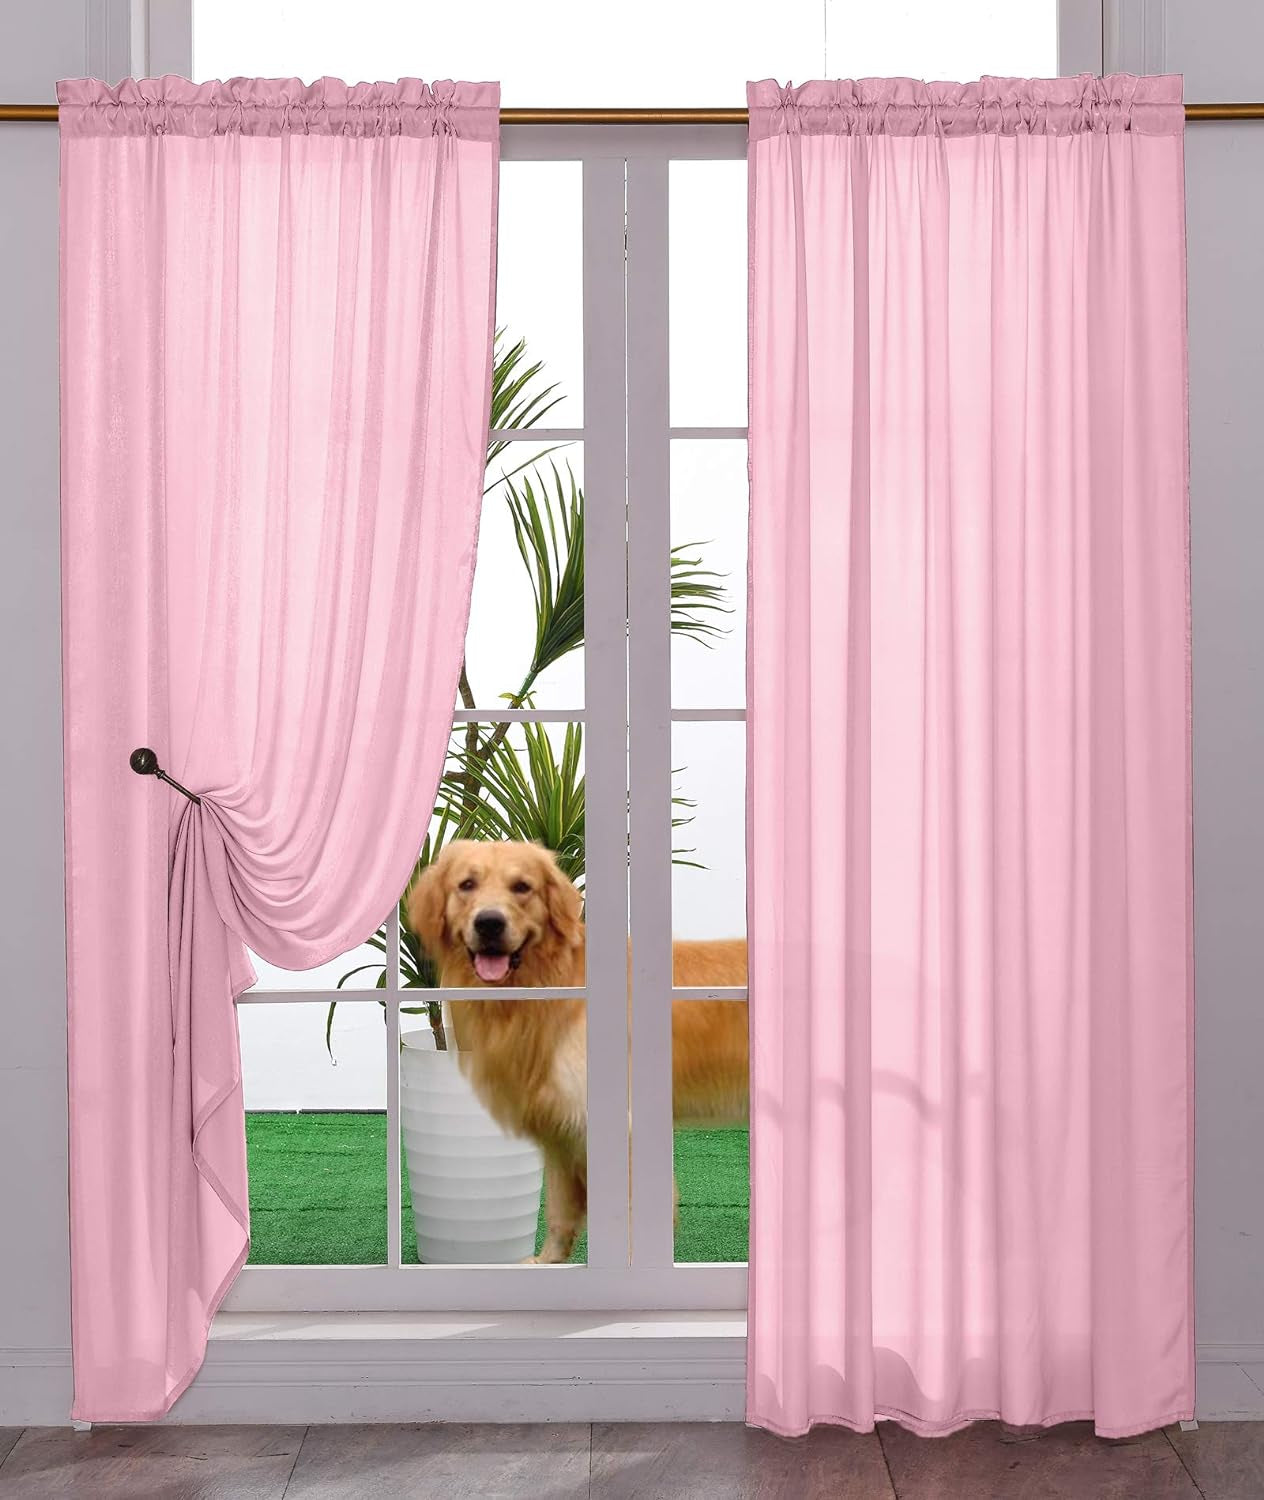 Yancorp Non-See-Through Velvet Opaque Privacy Curtains 2 Panels Drapes for Living Room Bedroom Doorway Divider Semi Sheer Curtain Kithen Window Panels (White, W52 Xl84)  Yancorp Baby Pink W52" X L96" 